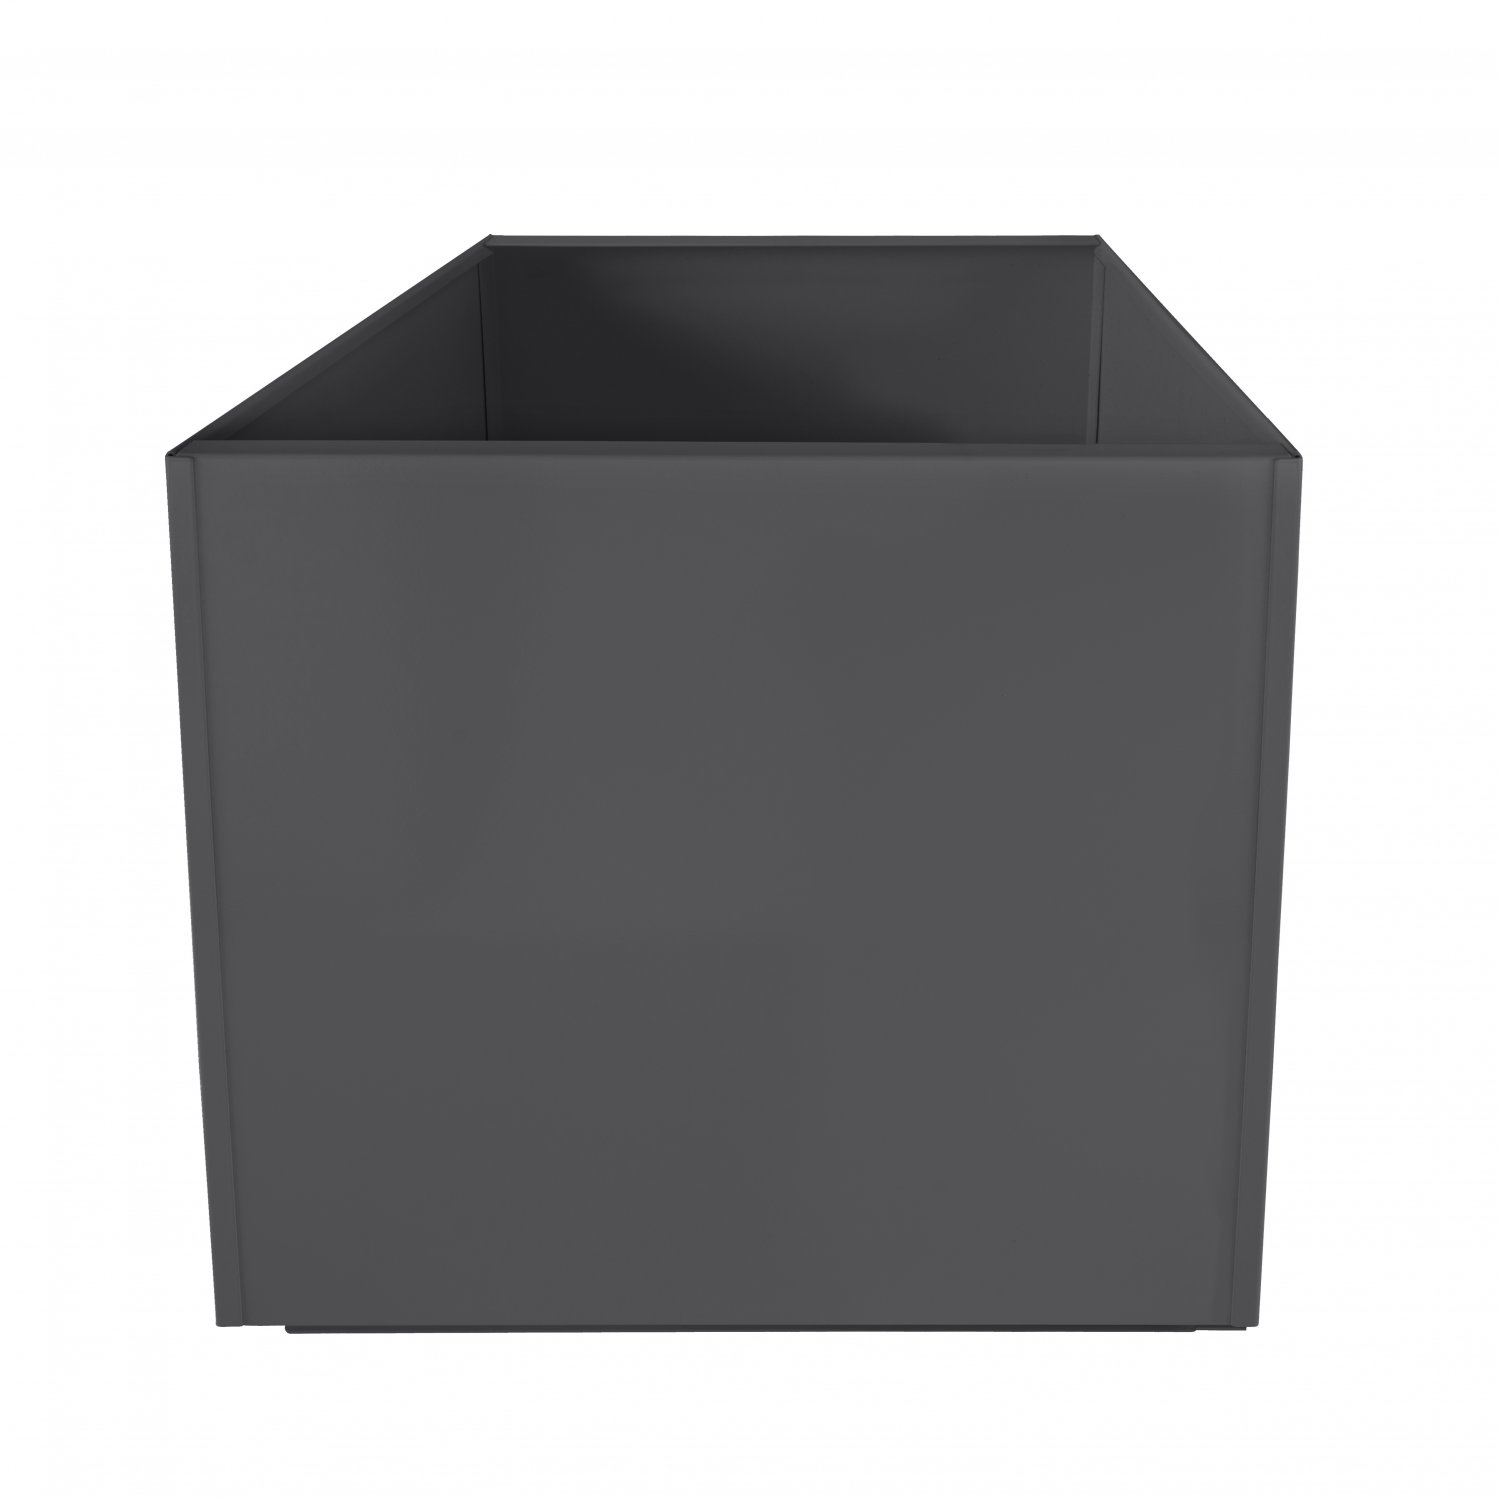 Charcoal Grey Square 20 Inch Metal Planter Box Extra Large Aluminum